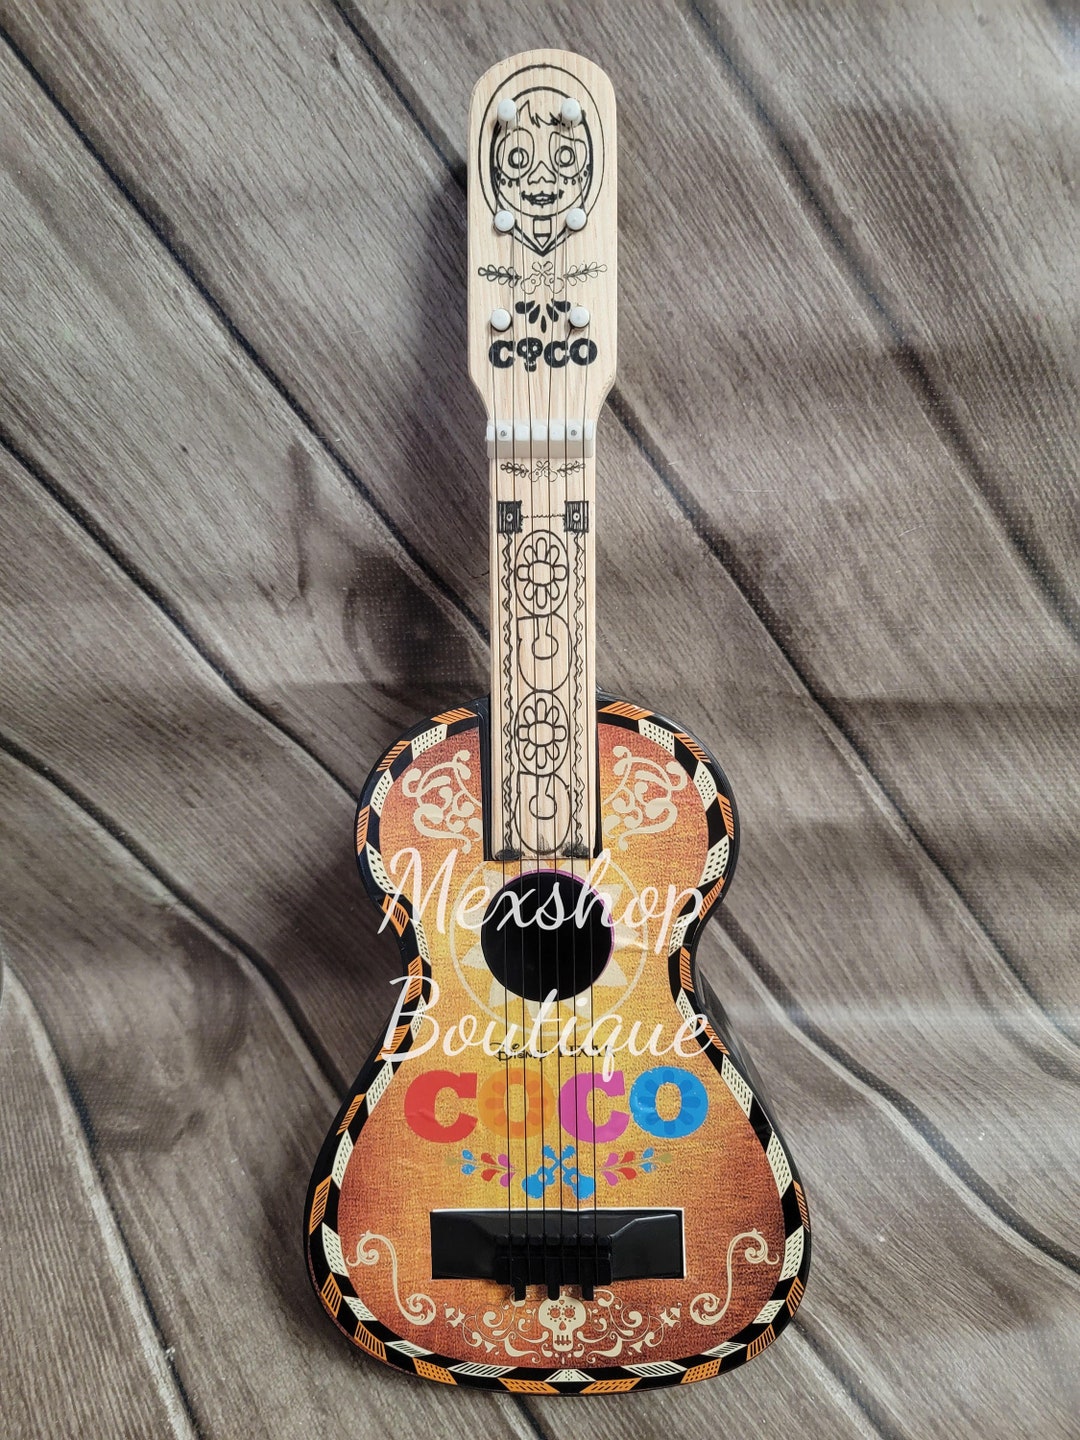 Guitar Toy Theme Coco, Wooden Guitar, It is not a real guitar, it is for children to play with